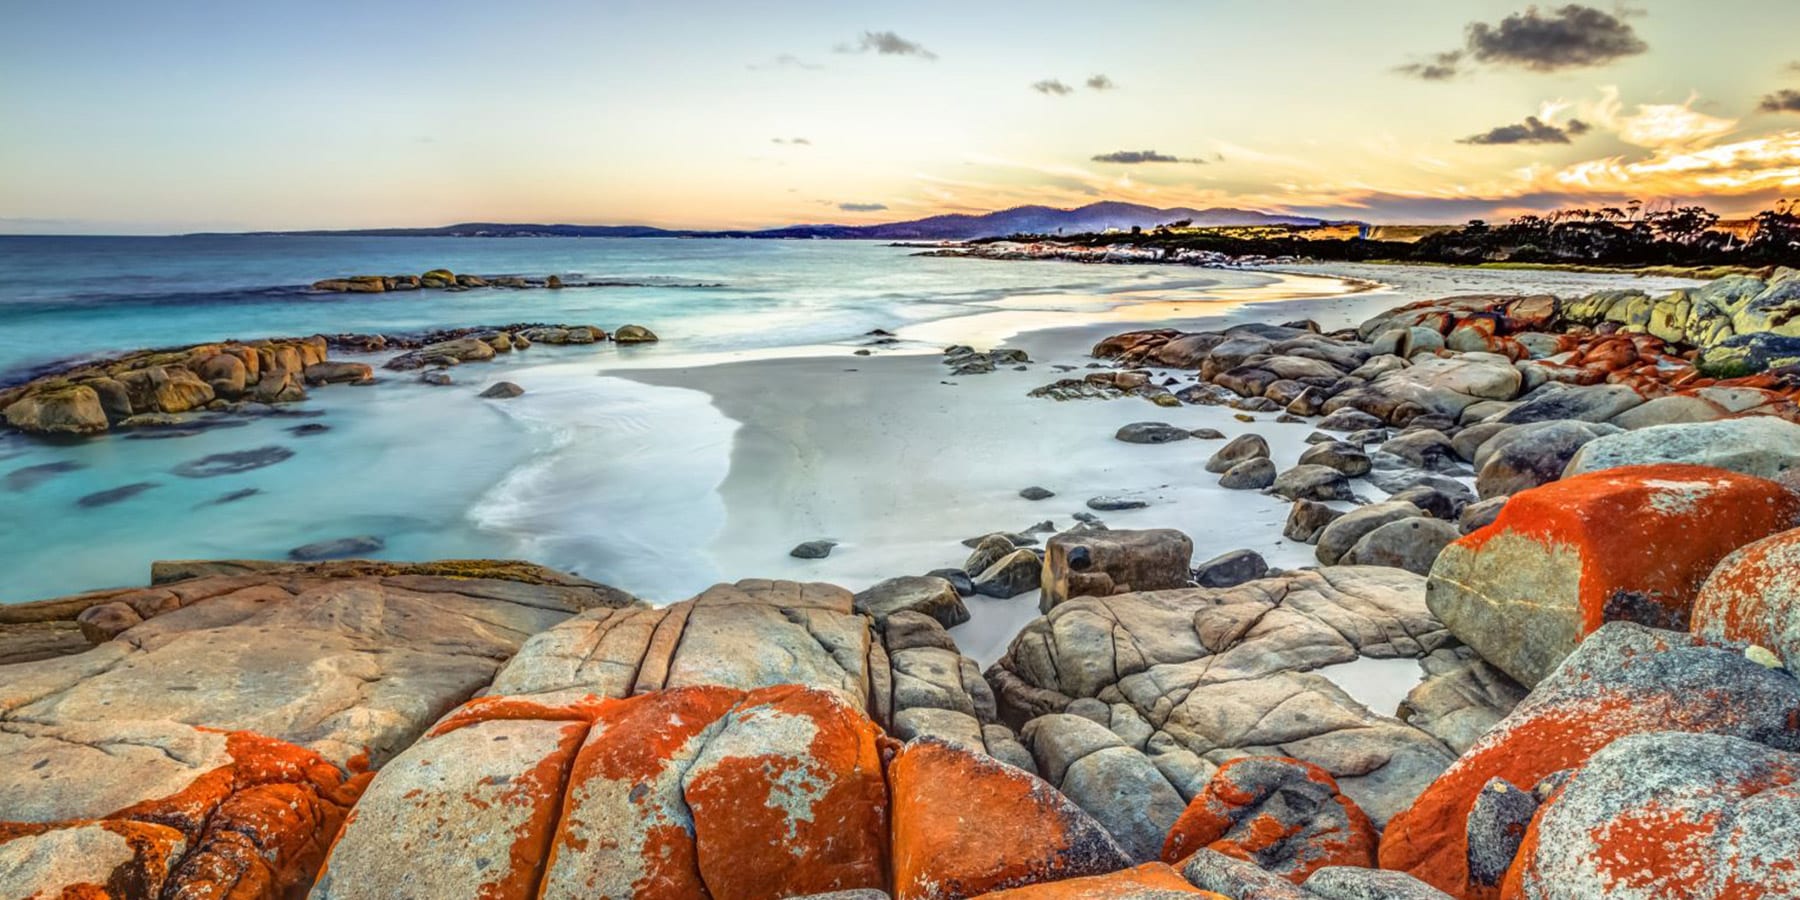 Craggy rocks tinged with vibrant orange with a view of waves along the beach - Bay of Fires Tasmania